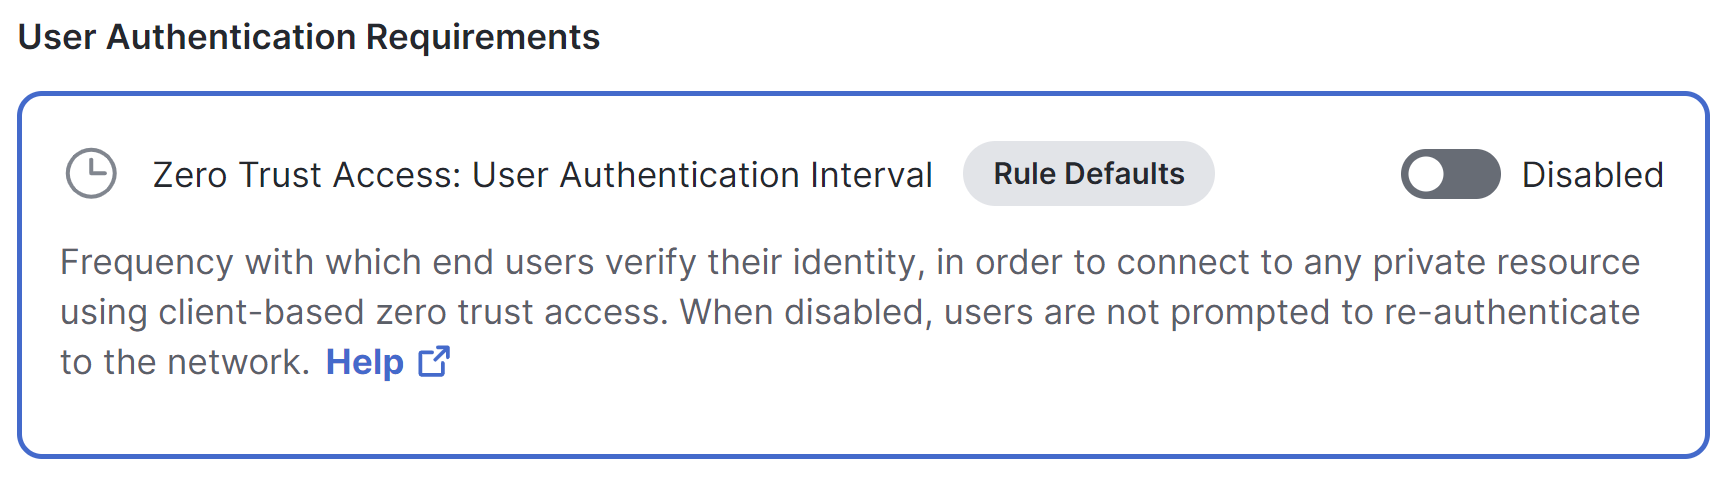 Step-up authentication: User authentication interval control in private access rule